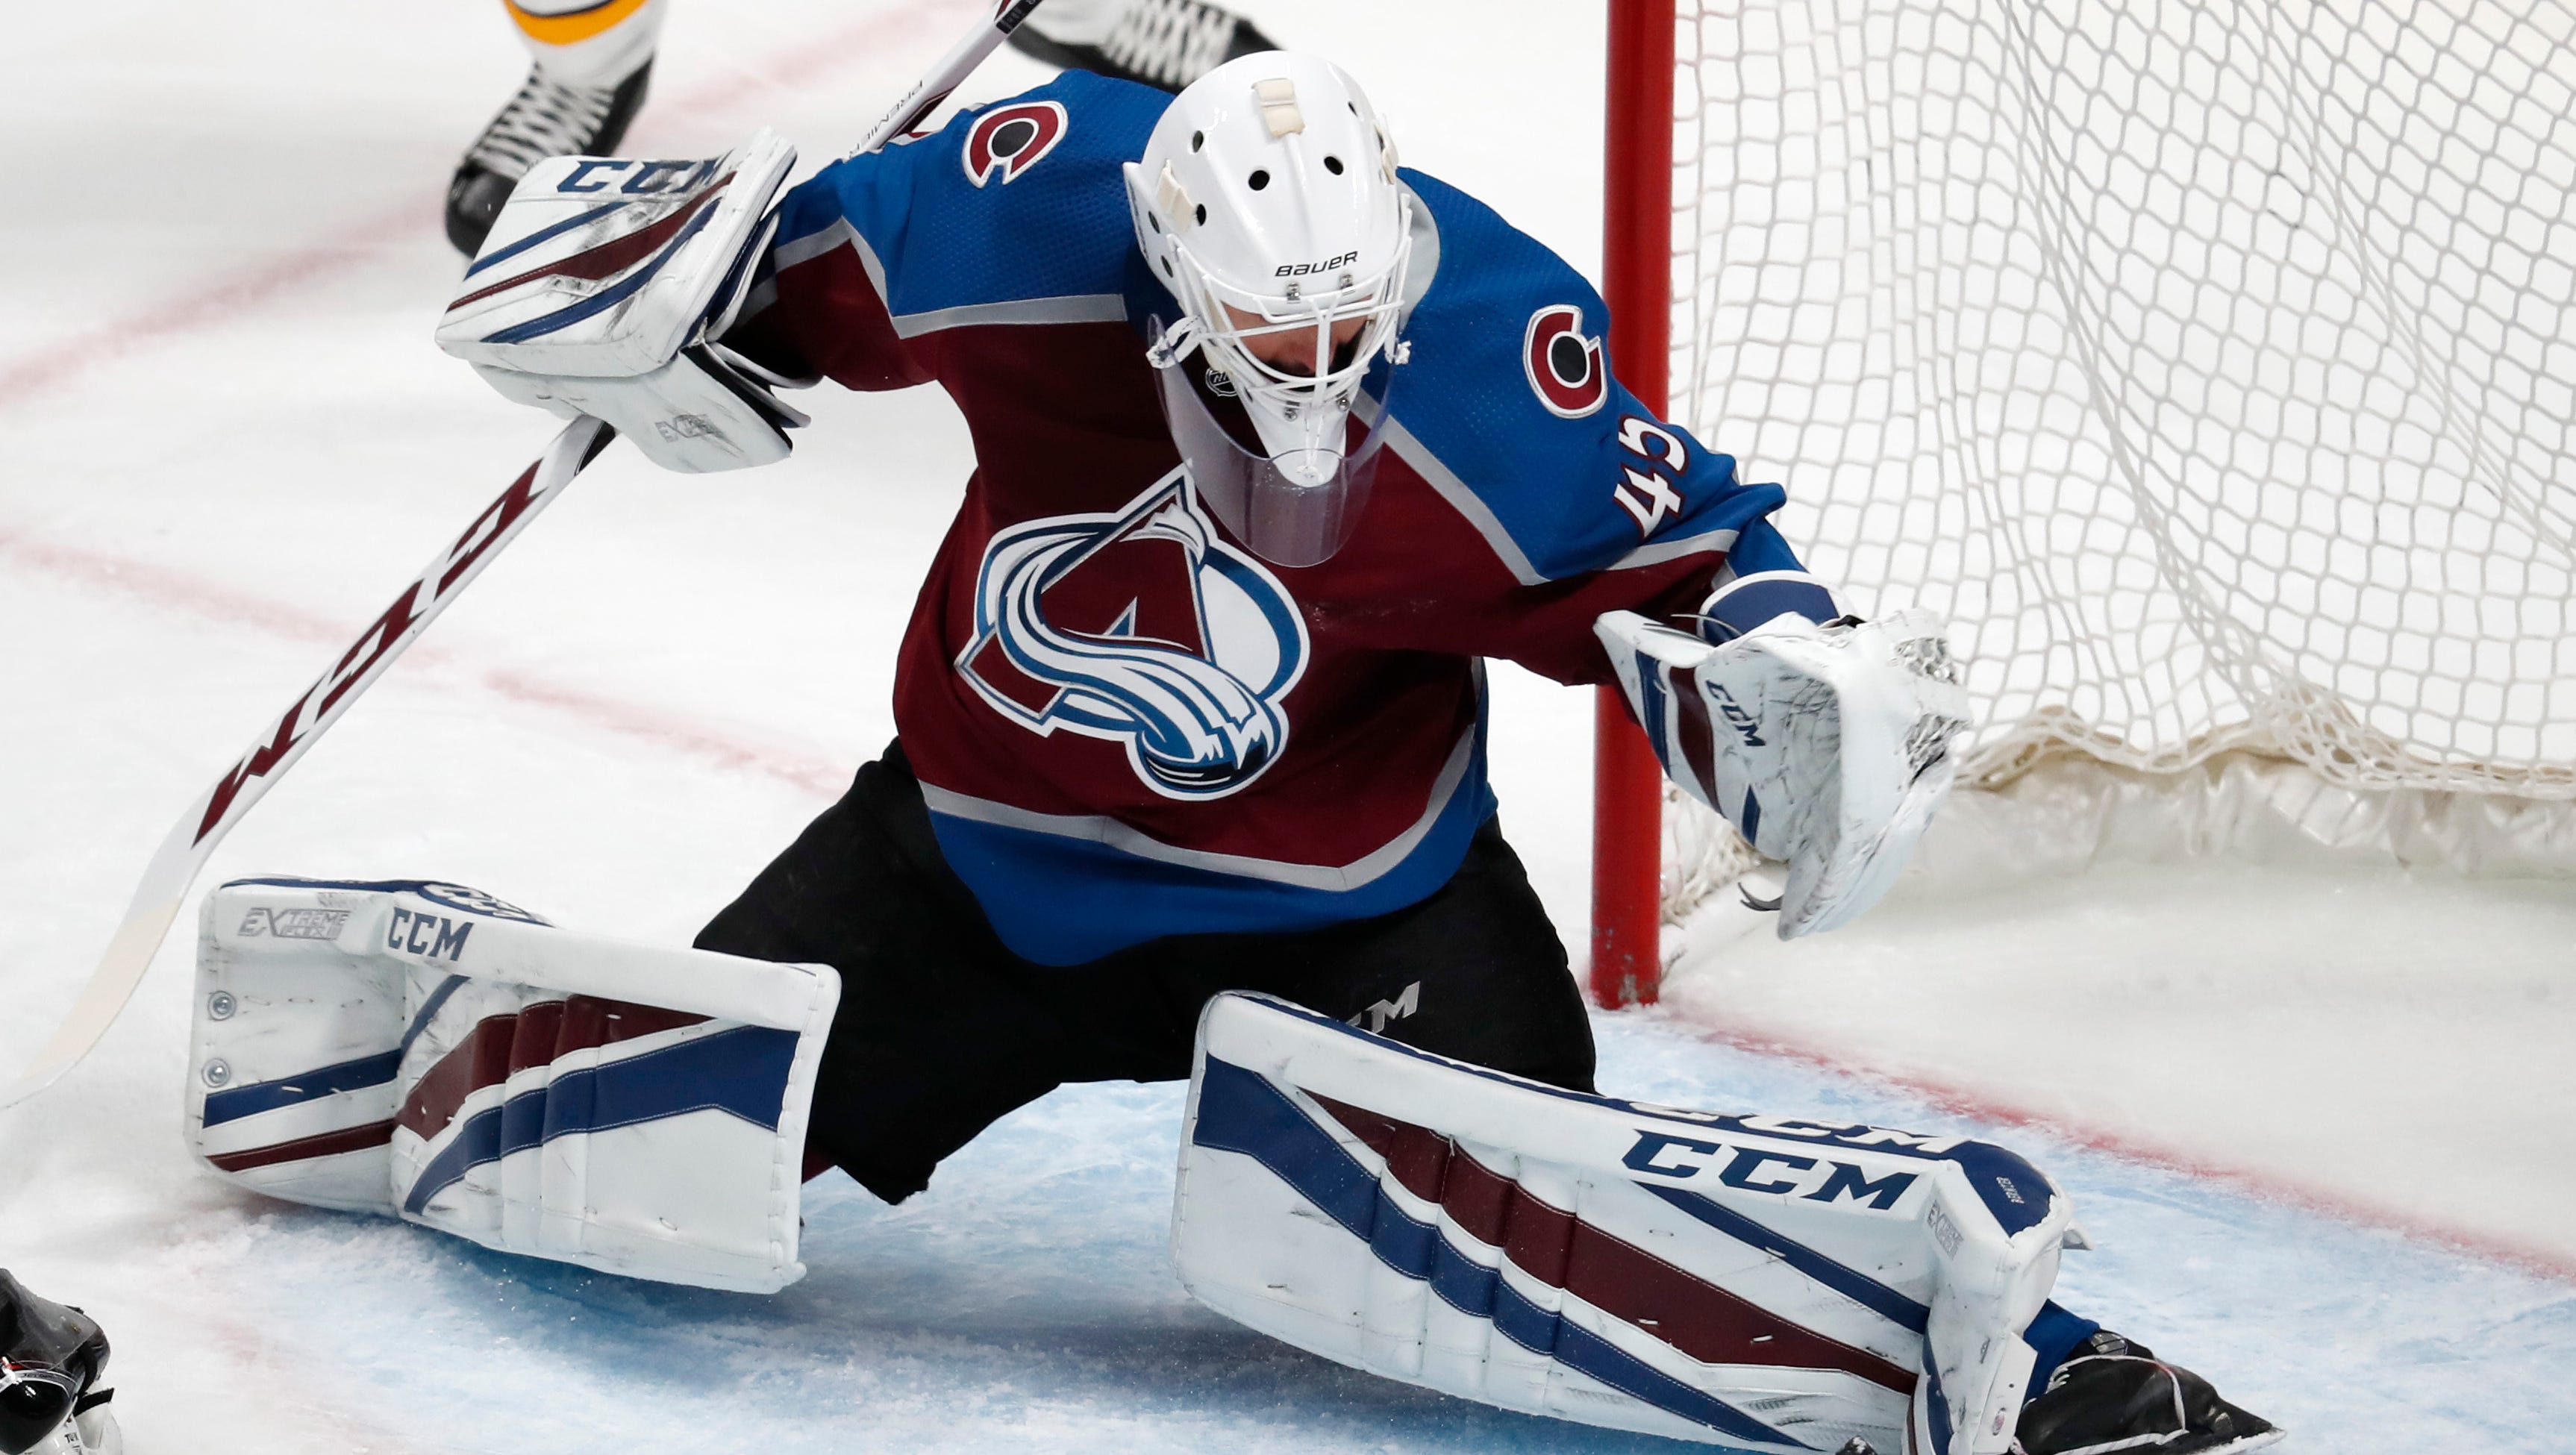 Colorado Avalanche goaltender Jonathan Bernier makes a pad save of a shot by the Nashville Predators during the first period of Game 4 of a first-round playoff series Wednesday, April 18, 2018, in Denver.